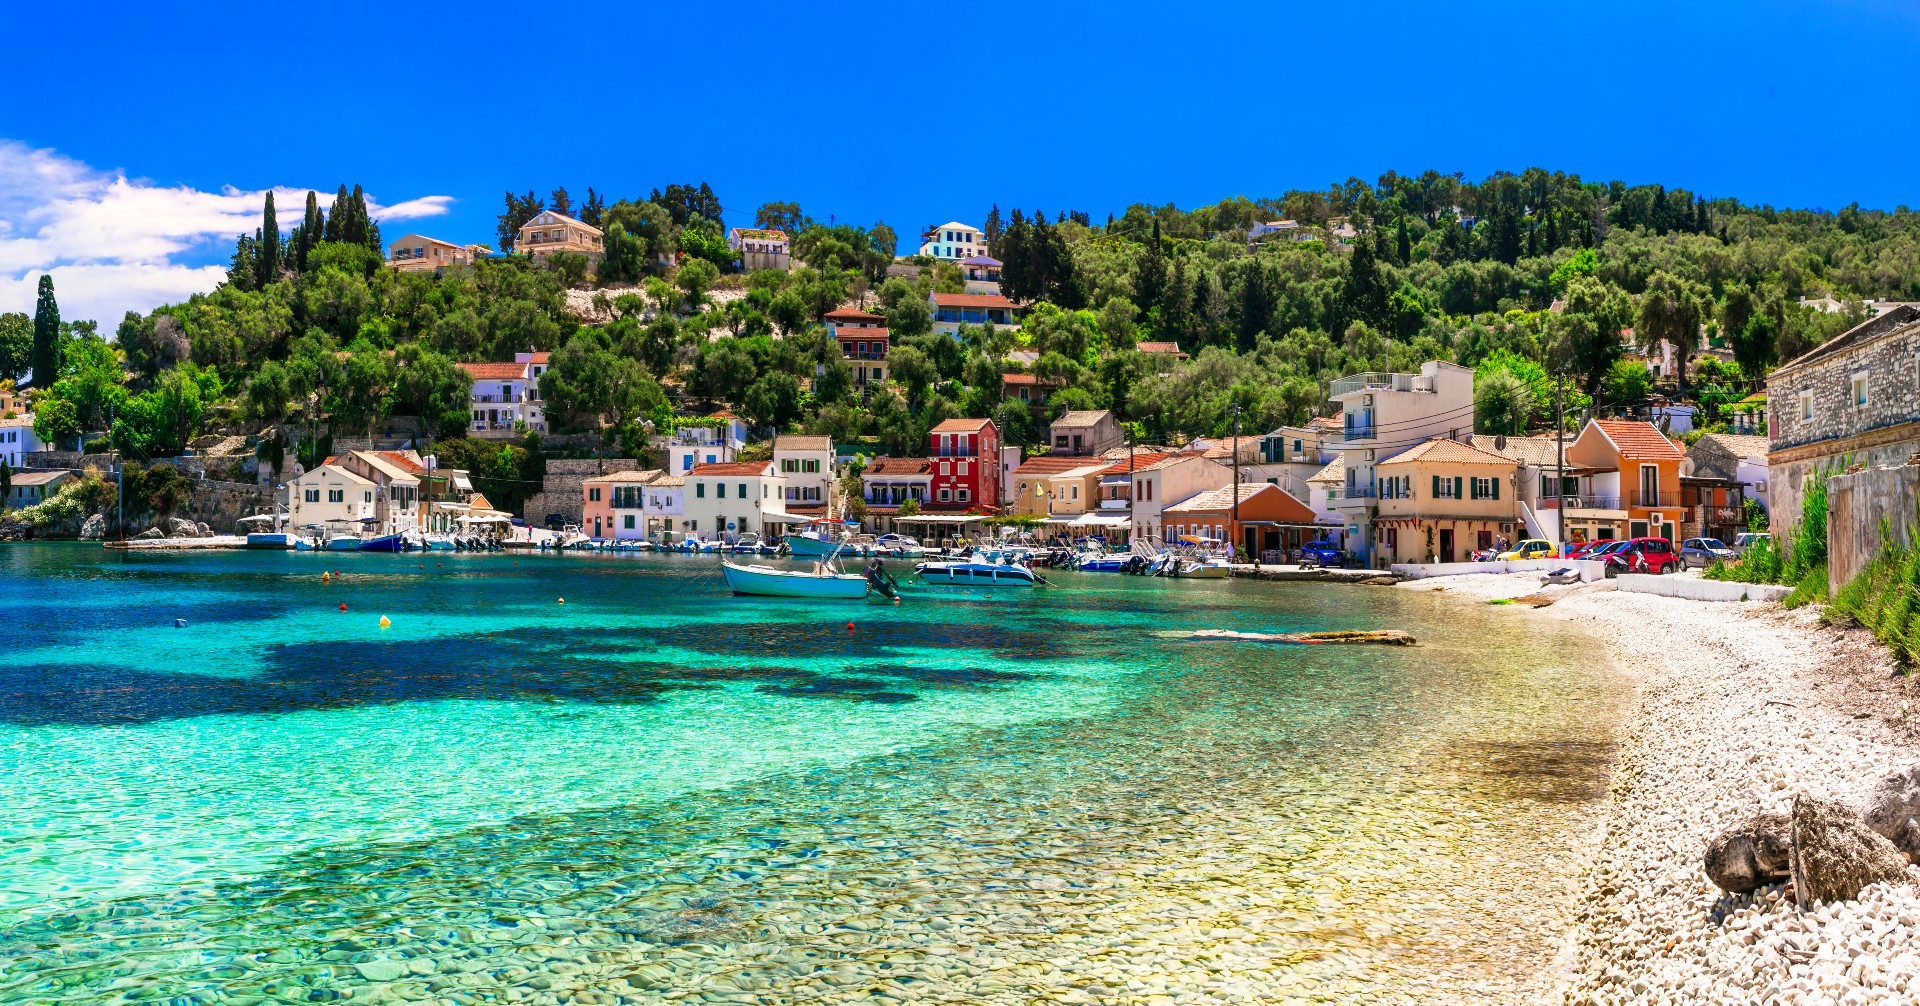 The Authentic tranquil Paxos island. Loggos fishing village. Ionian islands of Greece